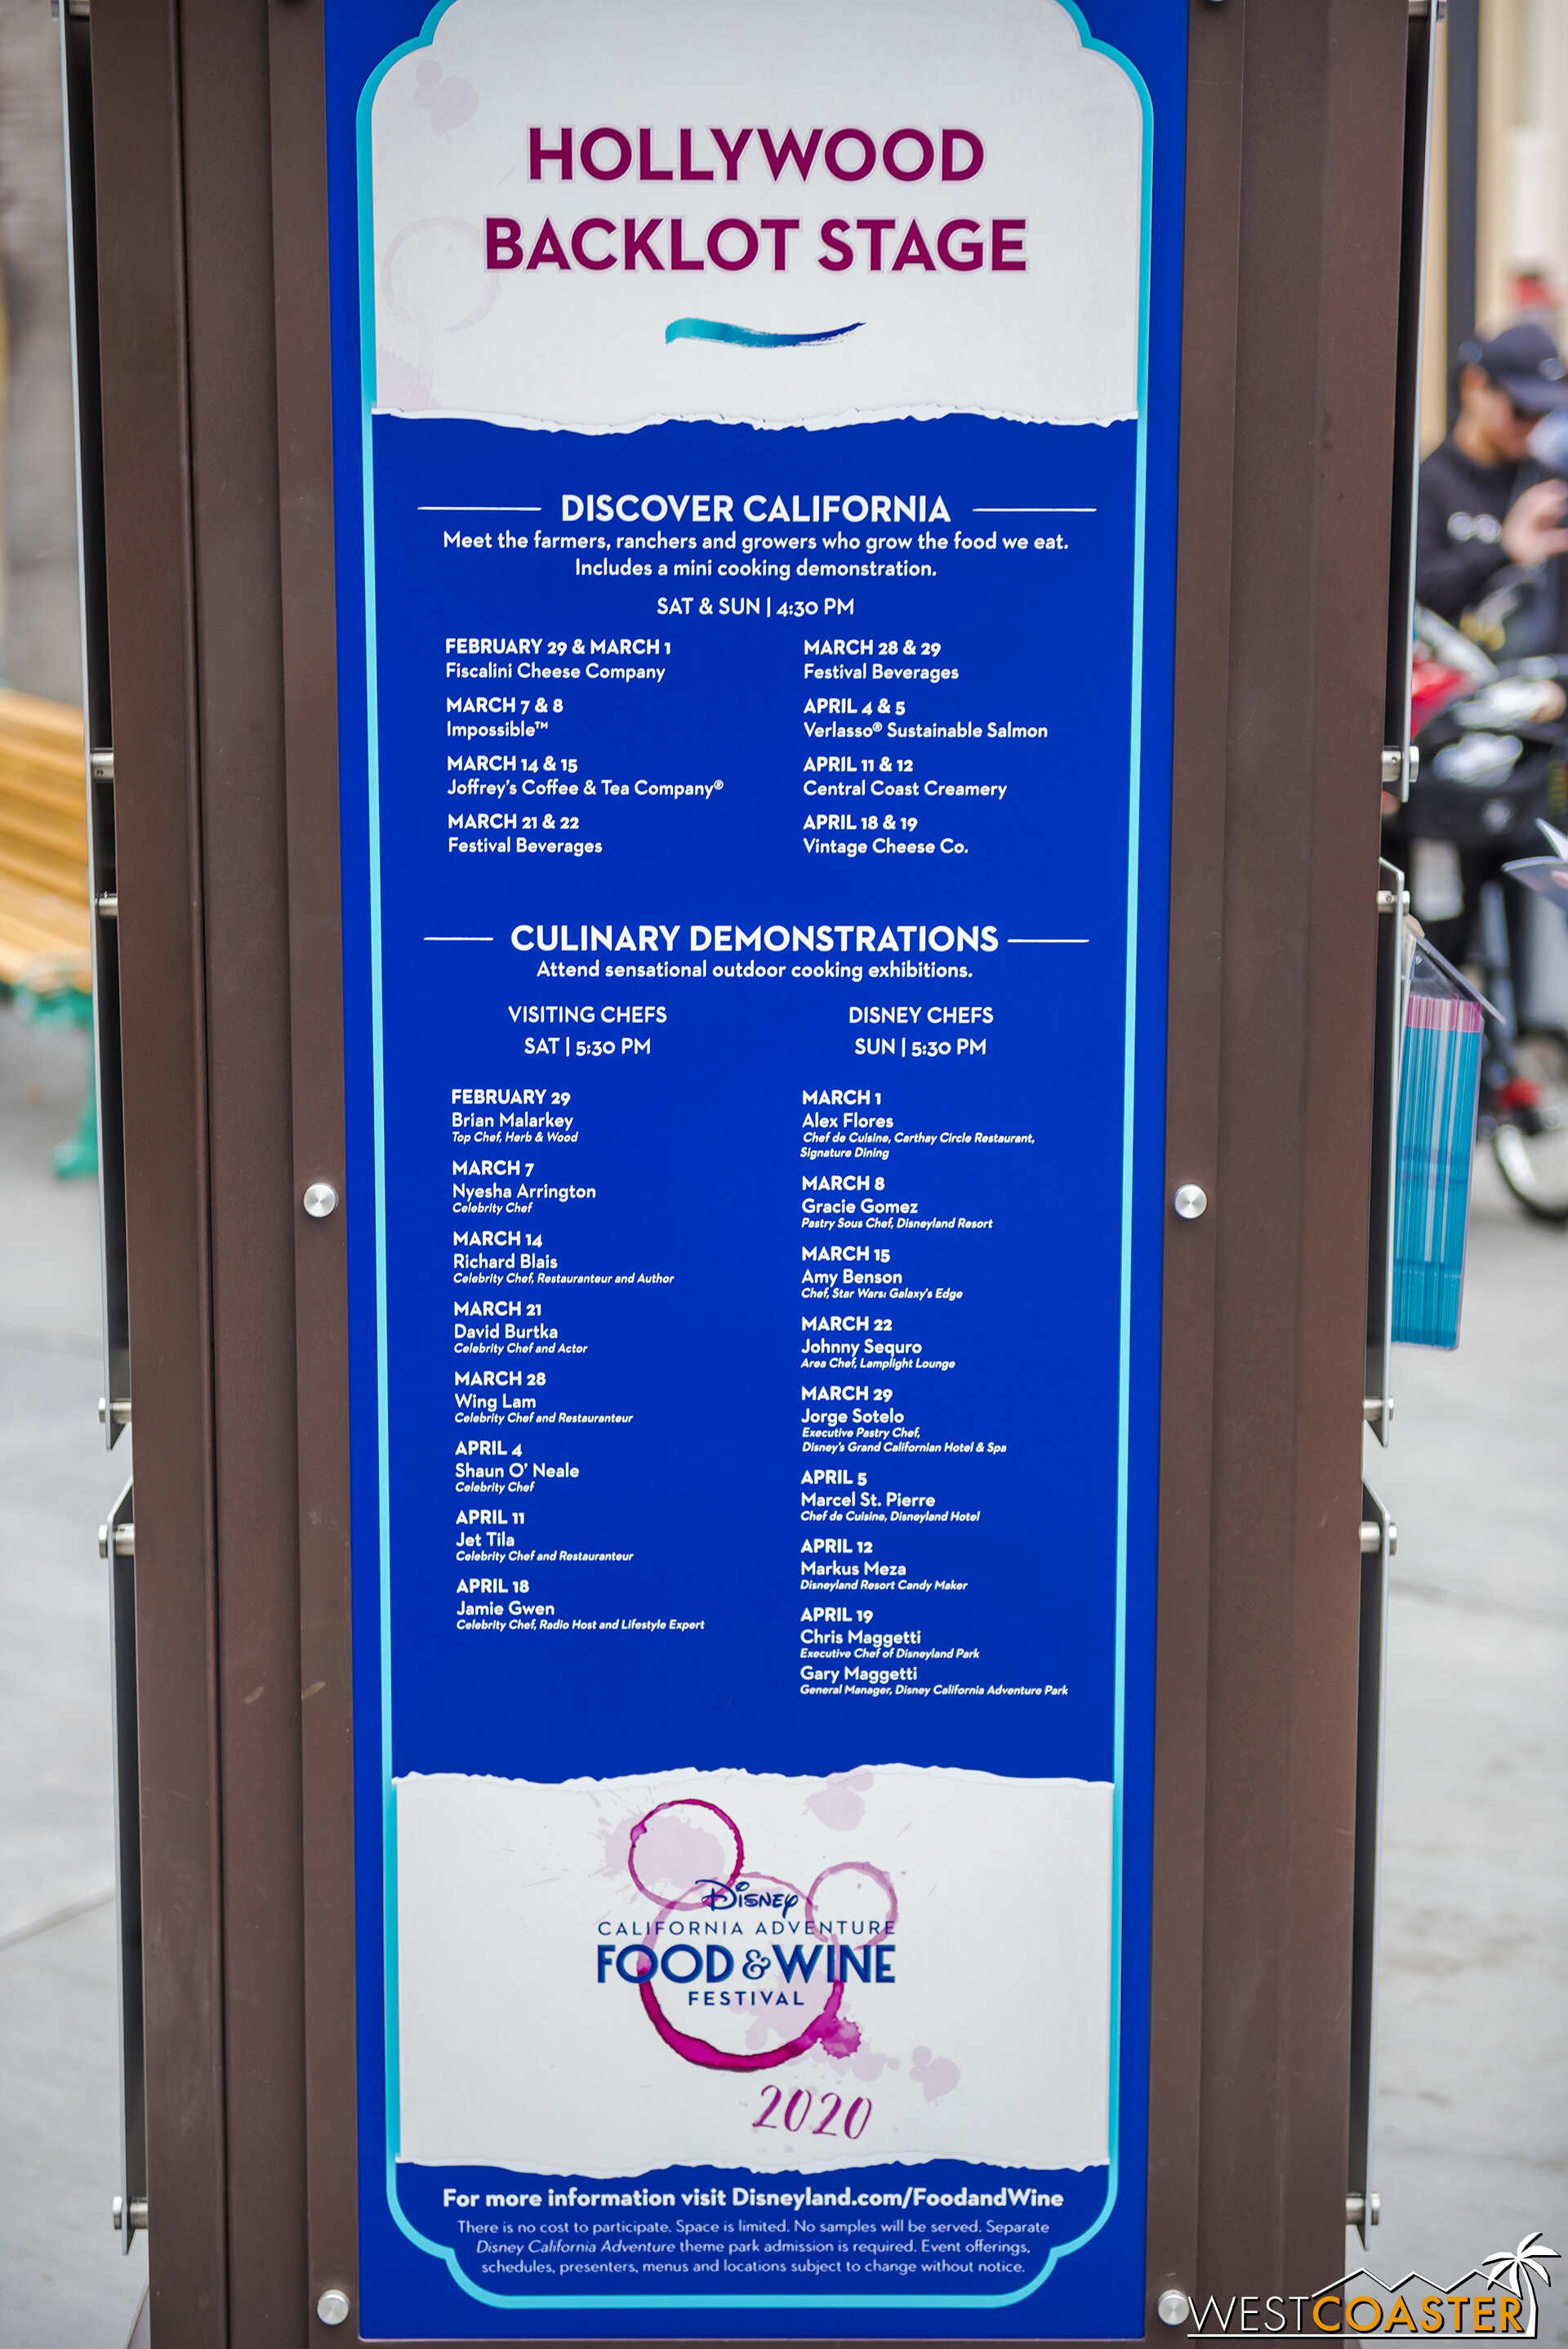  Hollywood Land is home to the culinary demonstrations and features this year.  The demo’s are mostly sold out already, and they take place in one of the soundstages. 